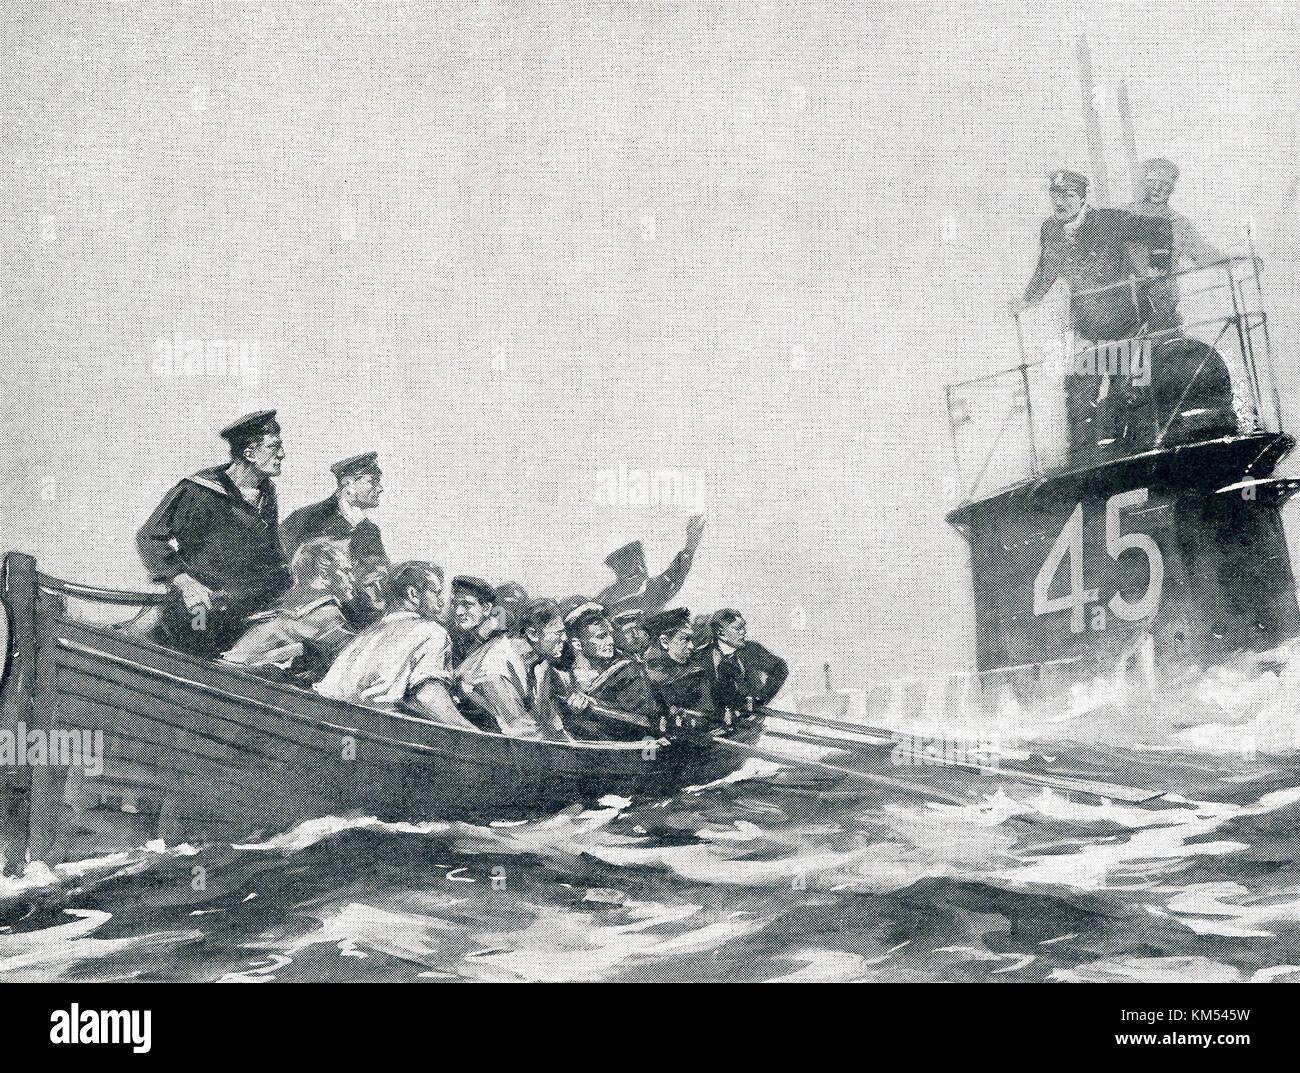 The caption for this photo that dates to around 1916 reads: British sailors, their cruiser sank, are picked up by one of their own submarines. The photo captures a scene during World War I. Stock Photo